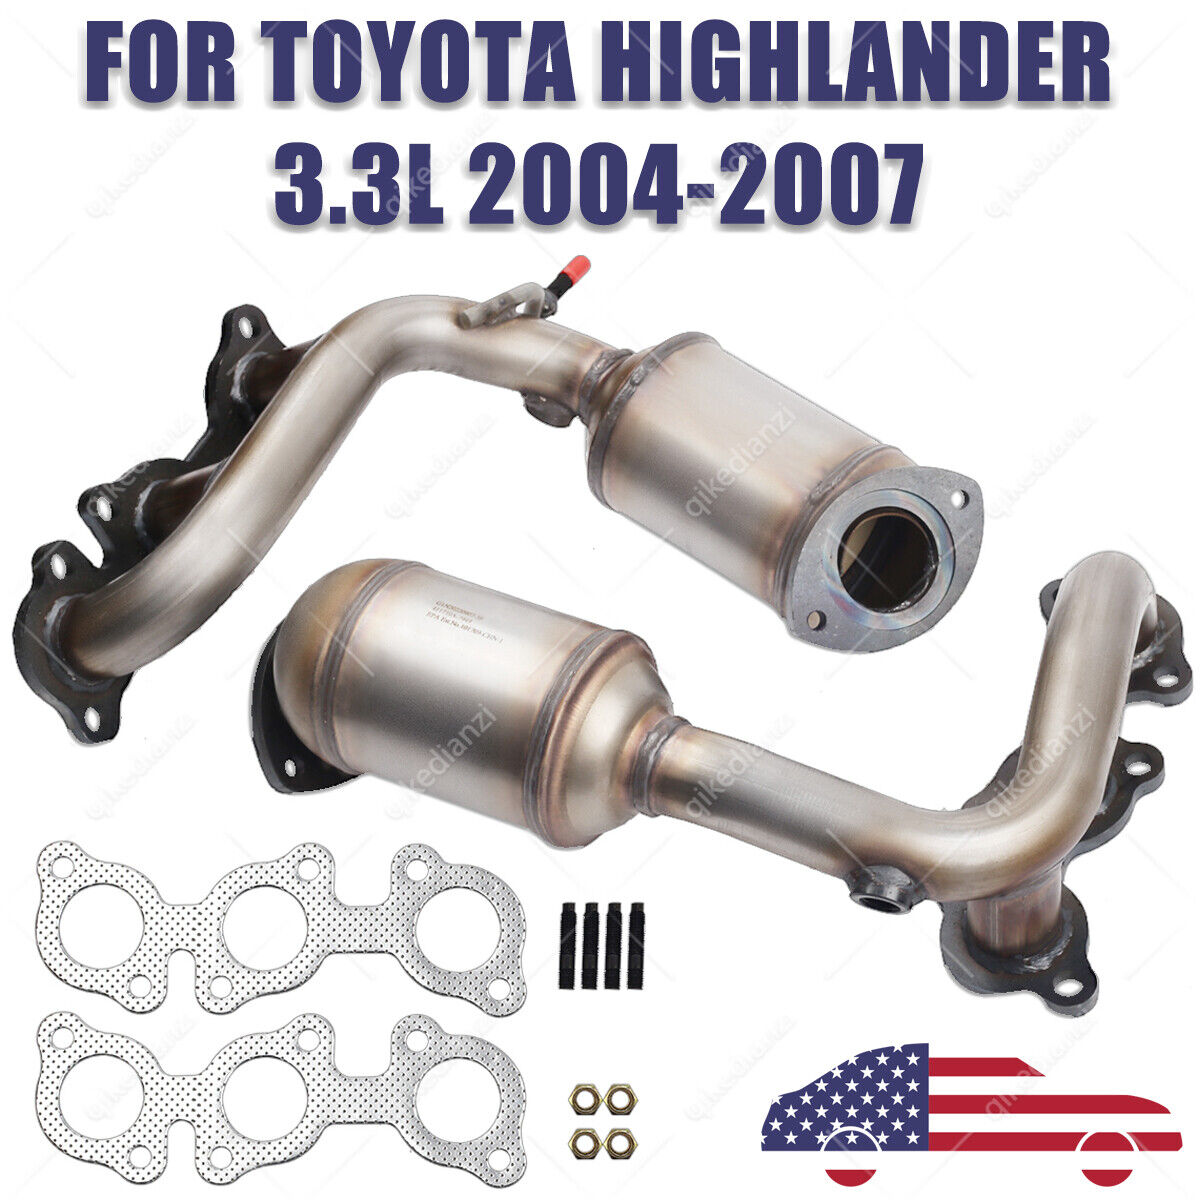 For 2004-2007 Toyota Highlander 3.3L Exhaust Catalytic Converters Front